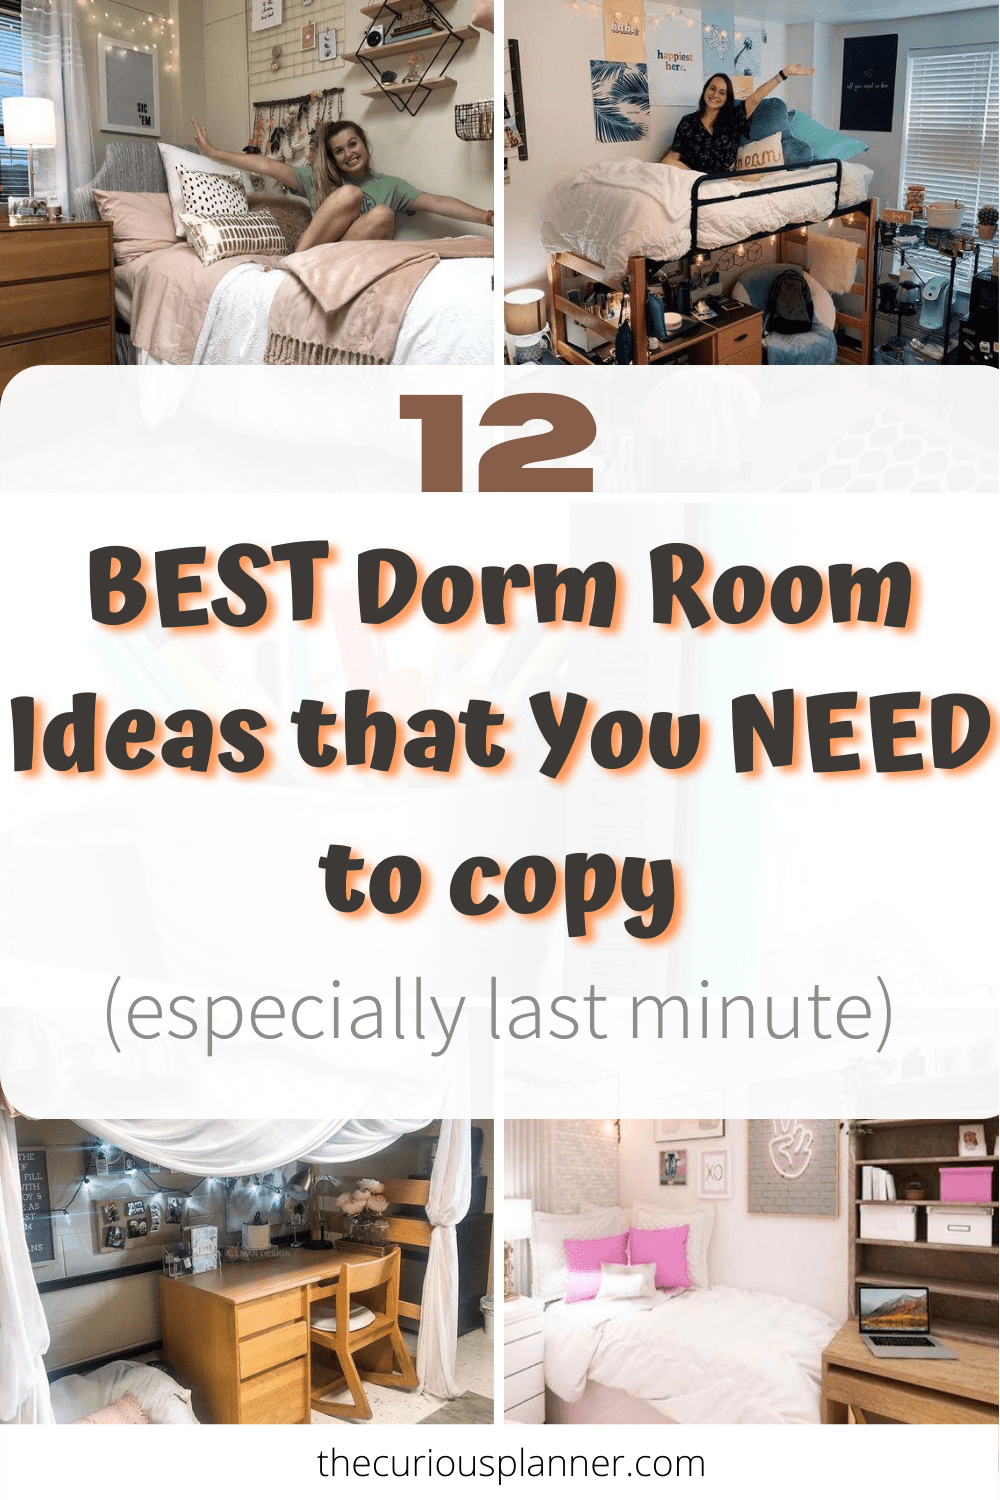 12 Best Dorm Room Ideas You Need to Copy - The Curious Planner